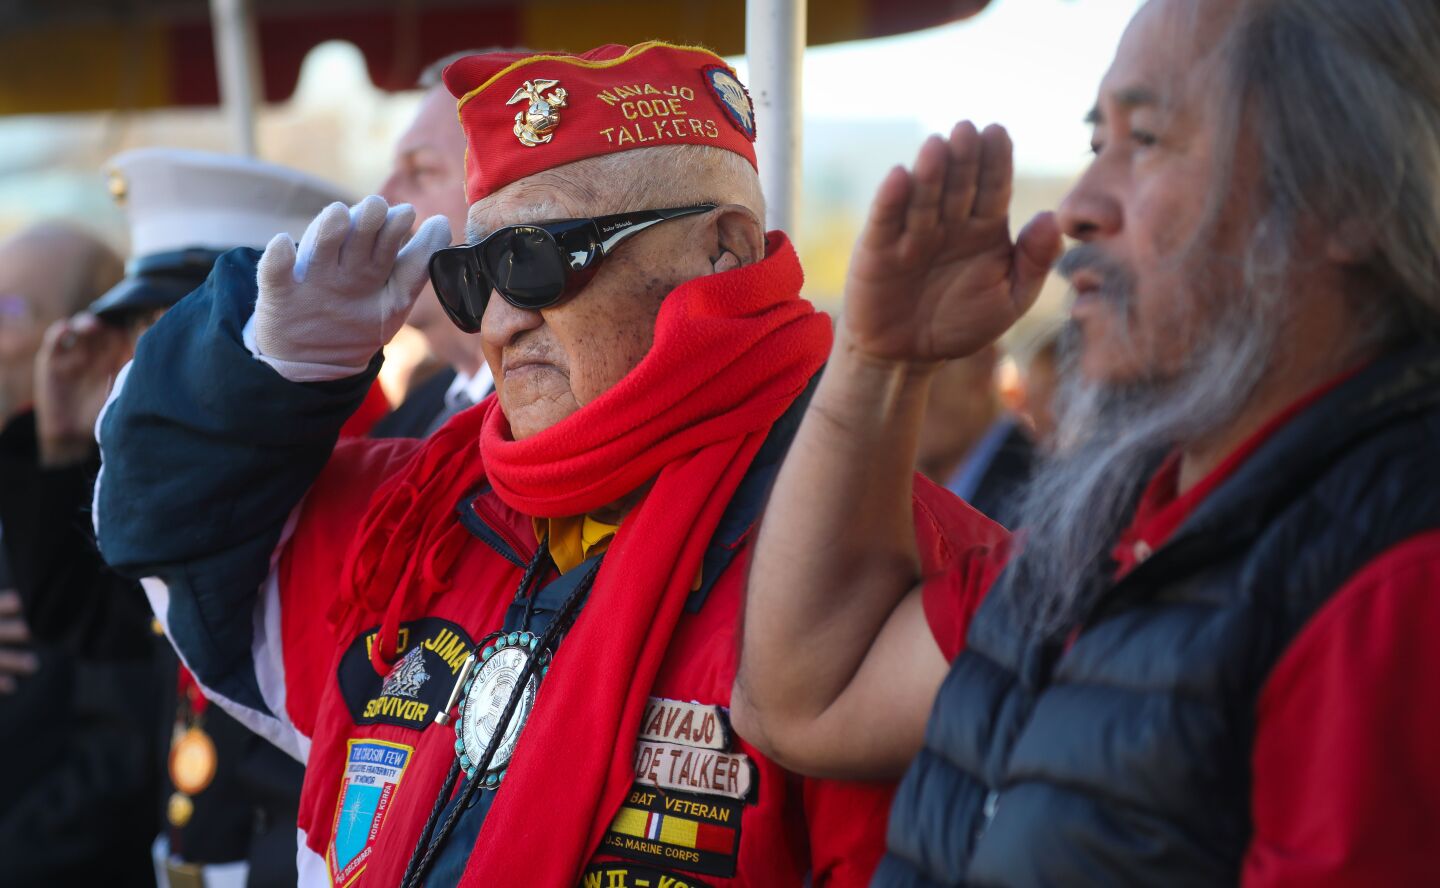 World War II Marine Corps veteran of the Battle of Iwo Jima, and one of the last Navajo code talkers, Thomas H. Begay, of Window Rock, Arizona, salutes during the national anthem, during commemoration ceremony for the 75th anniversary of the famous battle, held at Camp Pendleton, February 15, 2020. This is the last time the Iwo Jima Commemorative Committee is planning to hold a formal West Coast gathering of veterans of the battle.